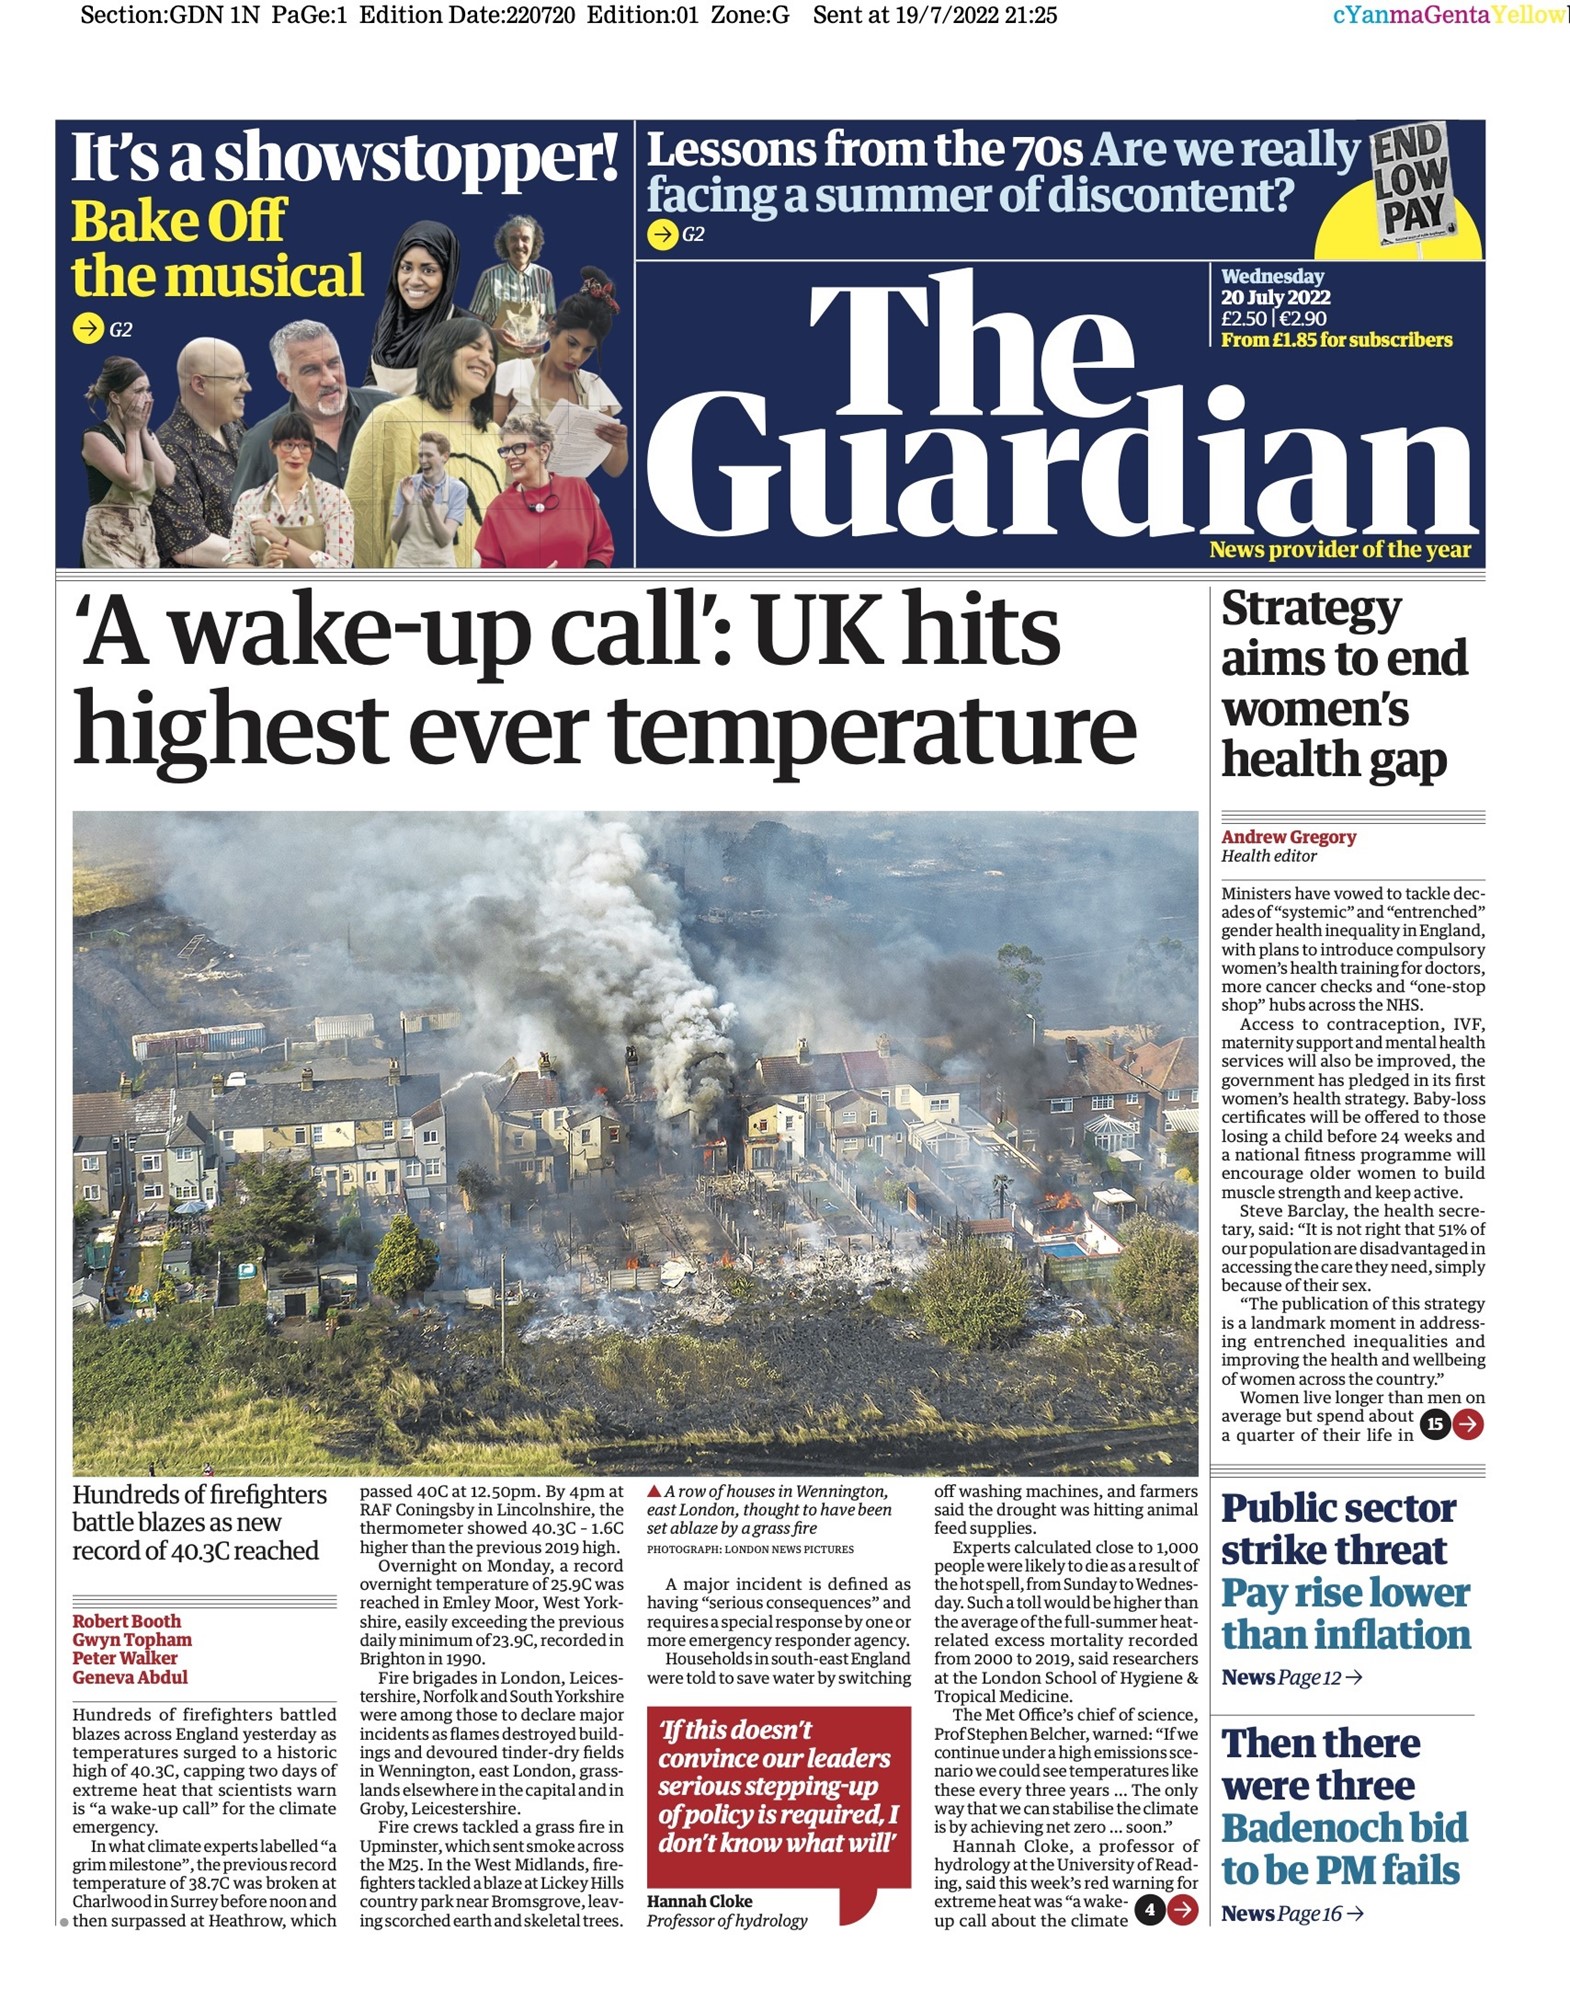 A newspaper front page calls the UK heatwave a wake-up call.